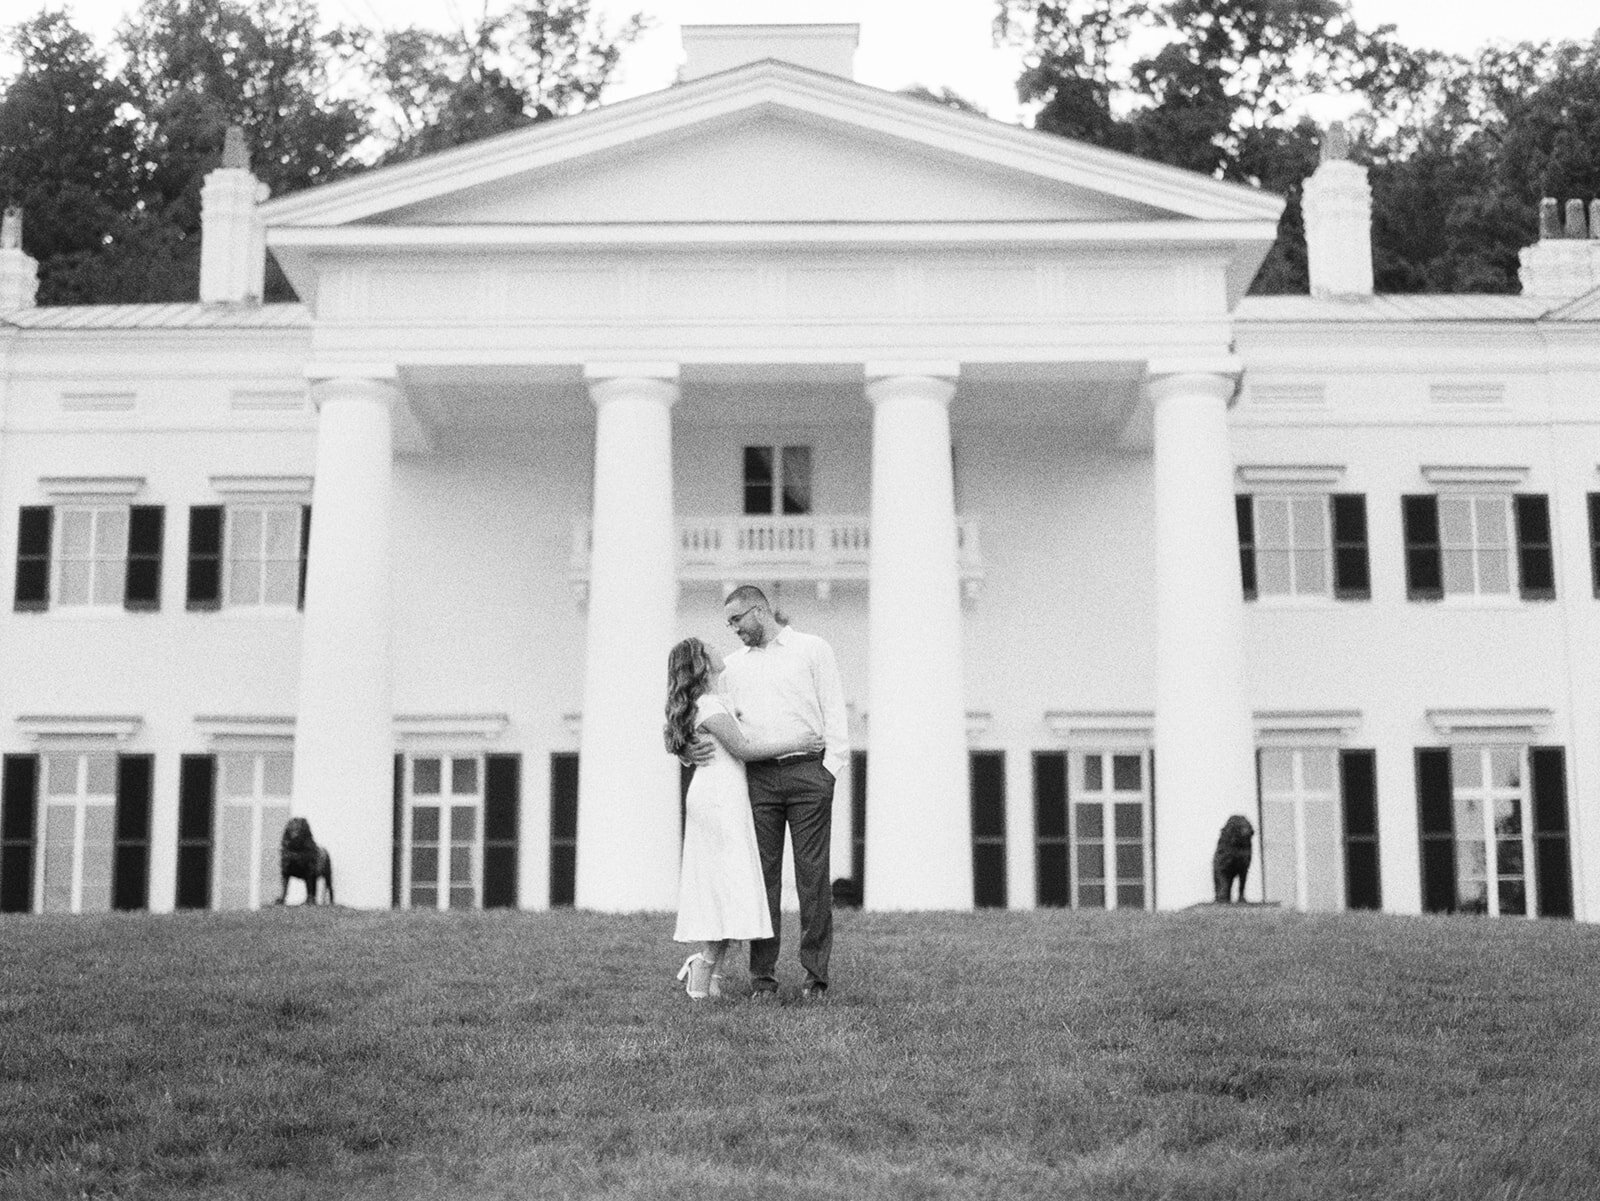 A couple on the lawn at mortgage hall shot on black and white film